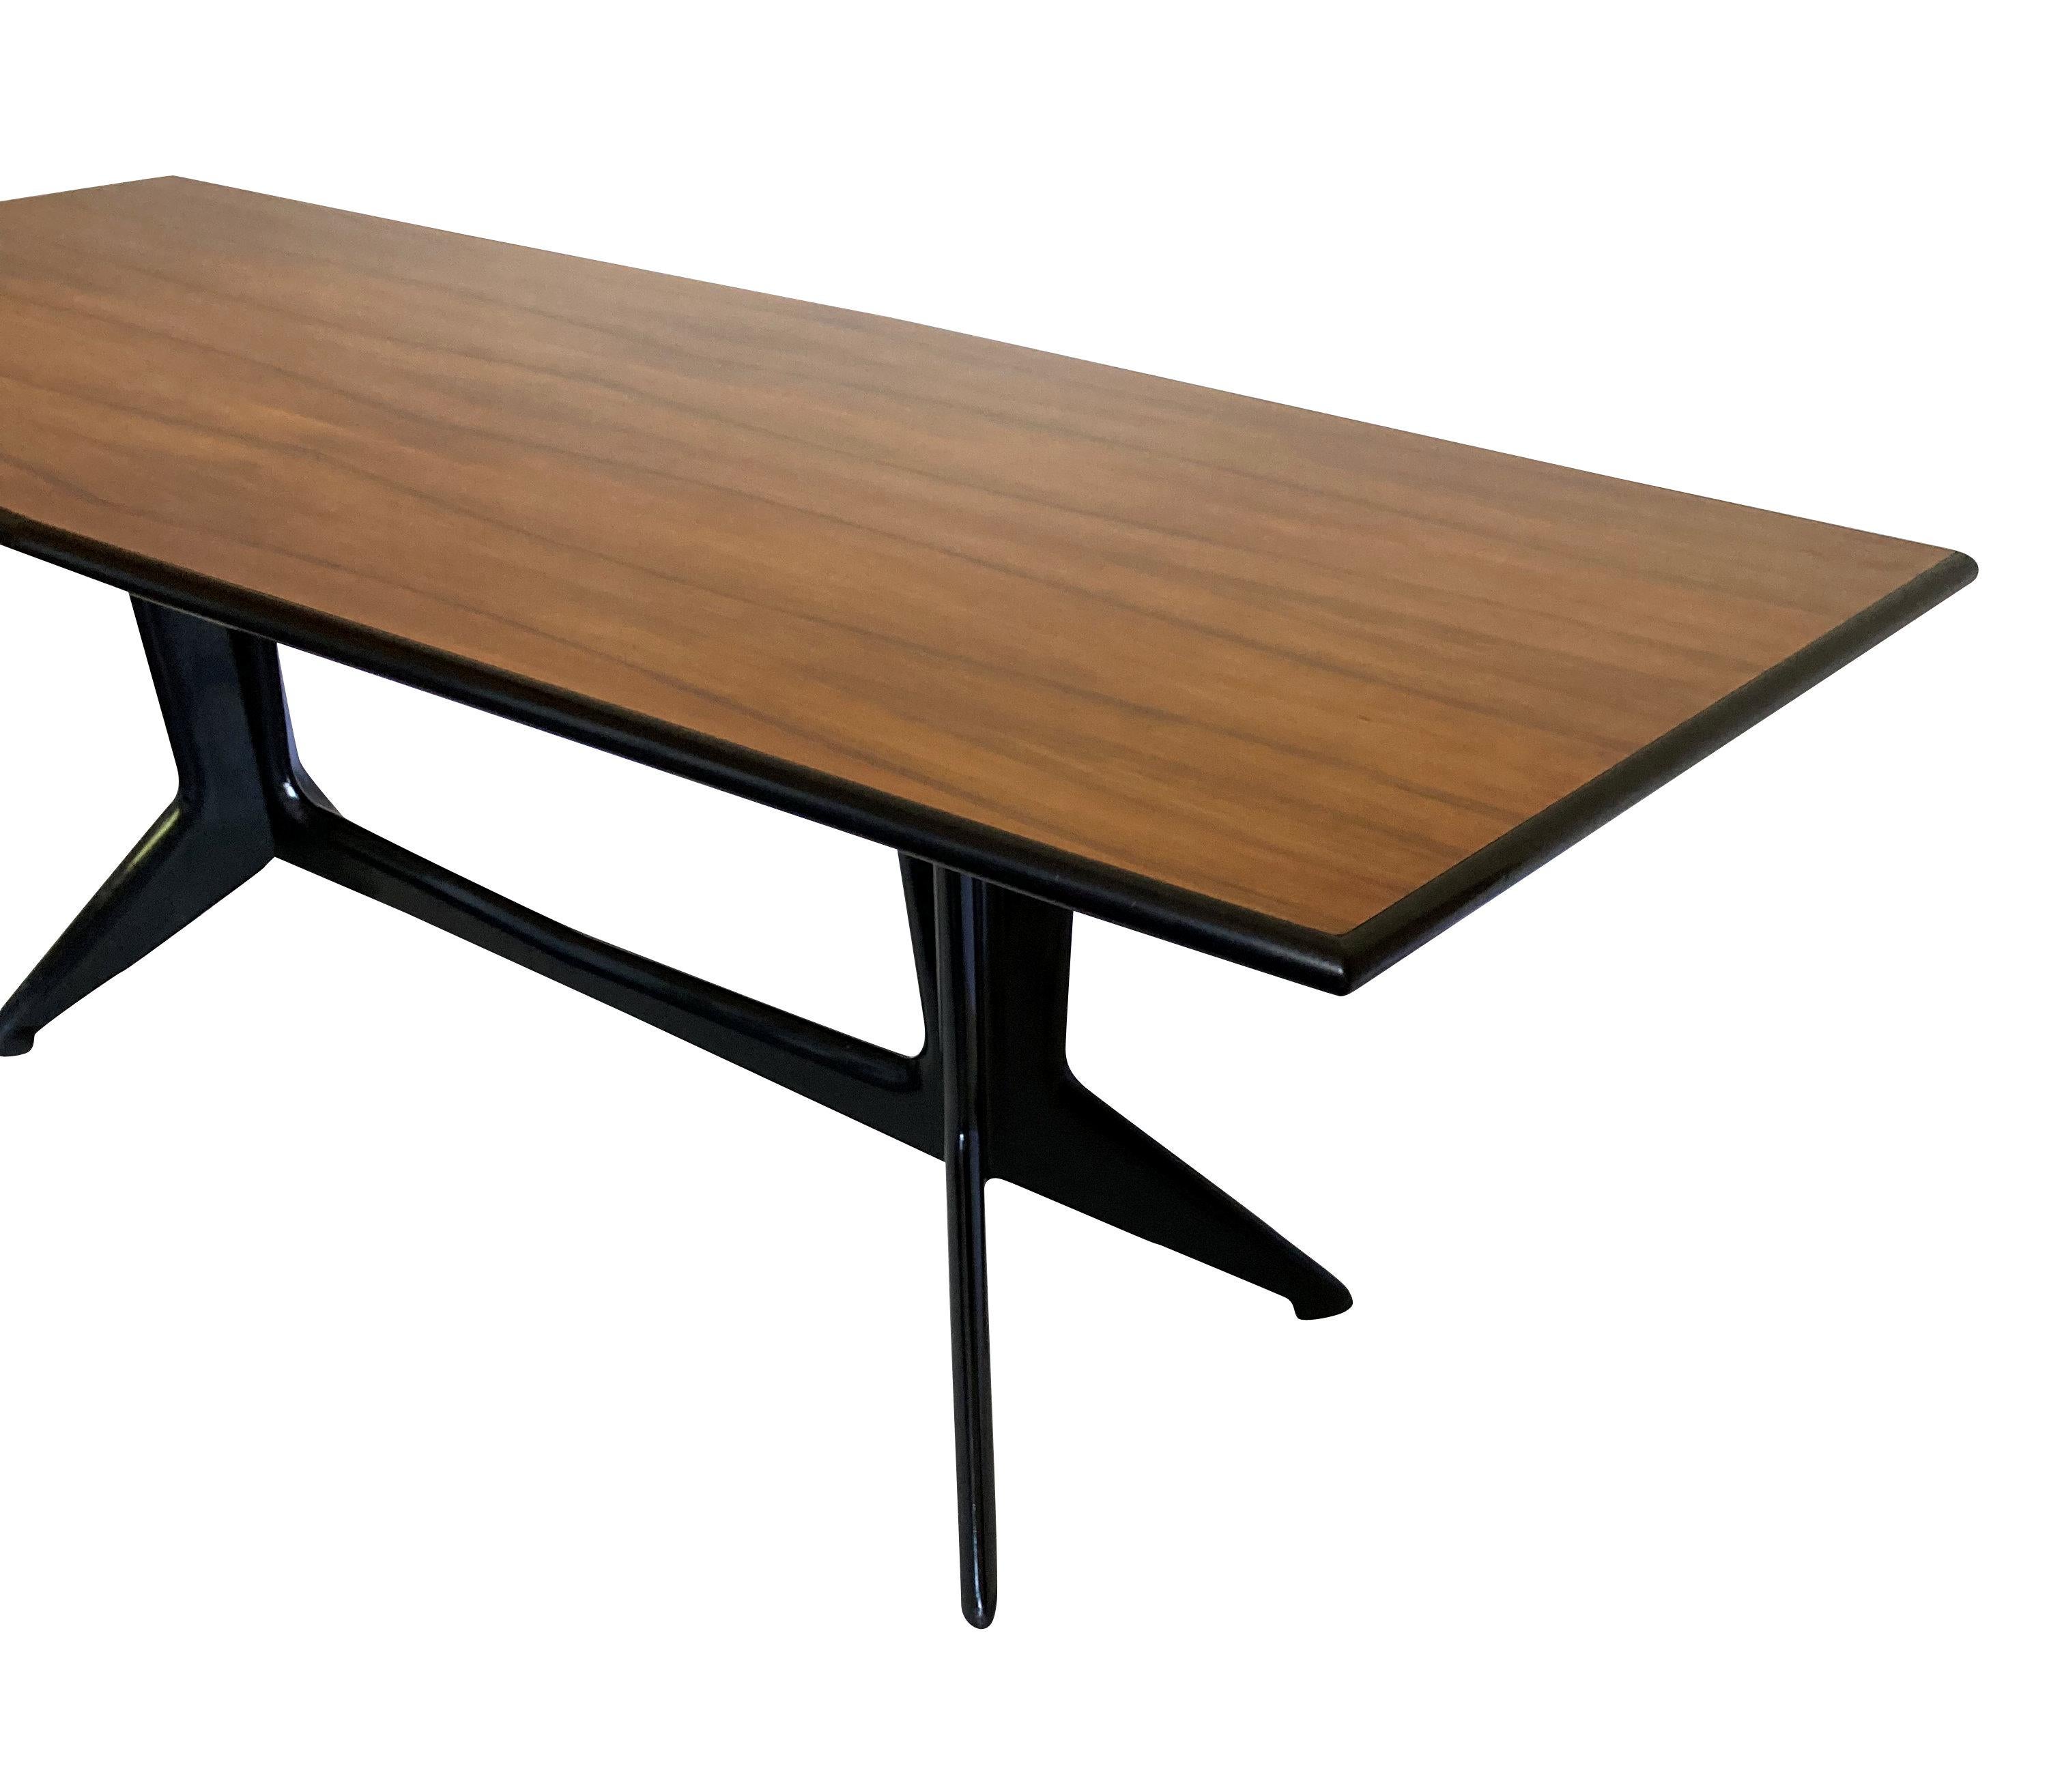 A large Italian Mid-Century dining table by Ico Parisi, with ebonised architectural legs and a pau ferro veneered top, with ebonised edge. This table will comfortably seat twelve.